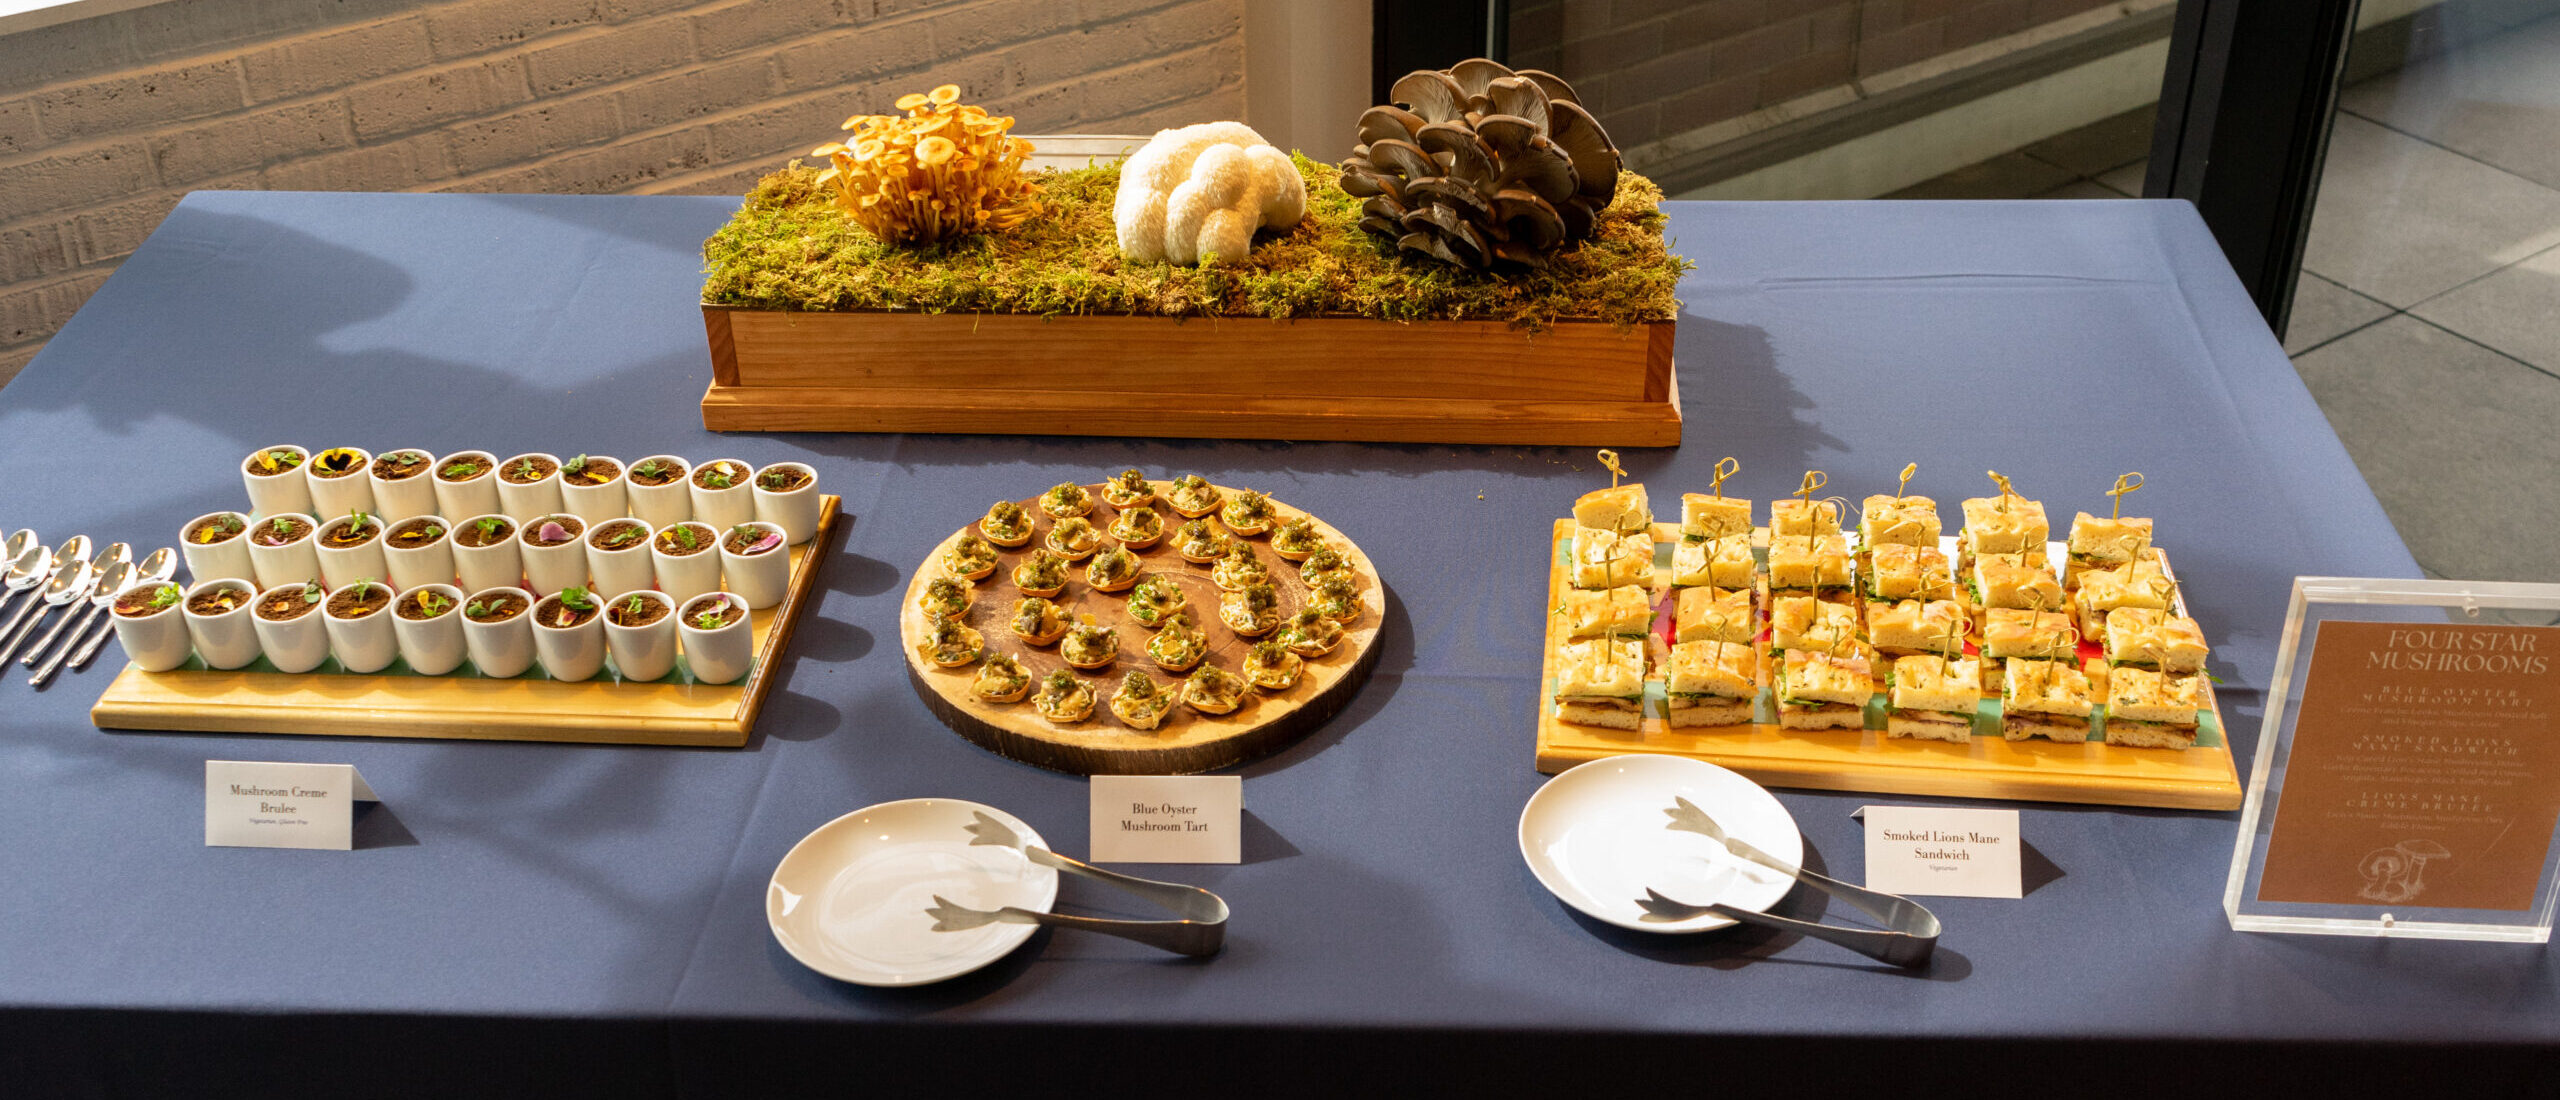 Buffet station featuring Four Star Mushrooms and 3 hors d'oeuvres.